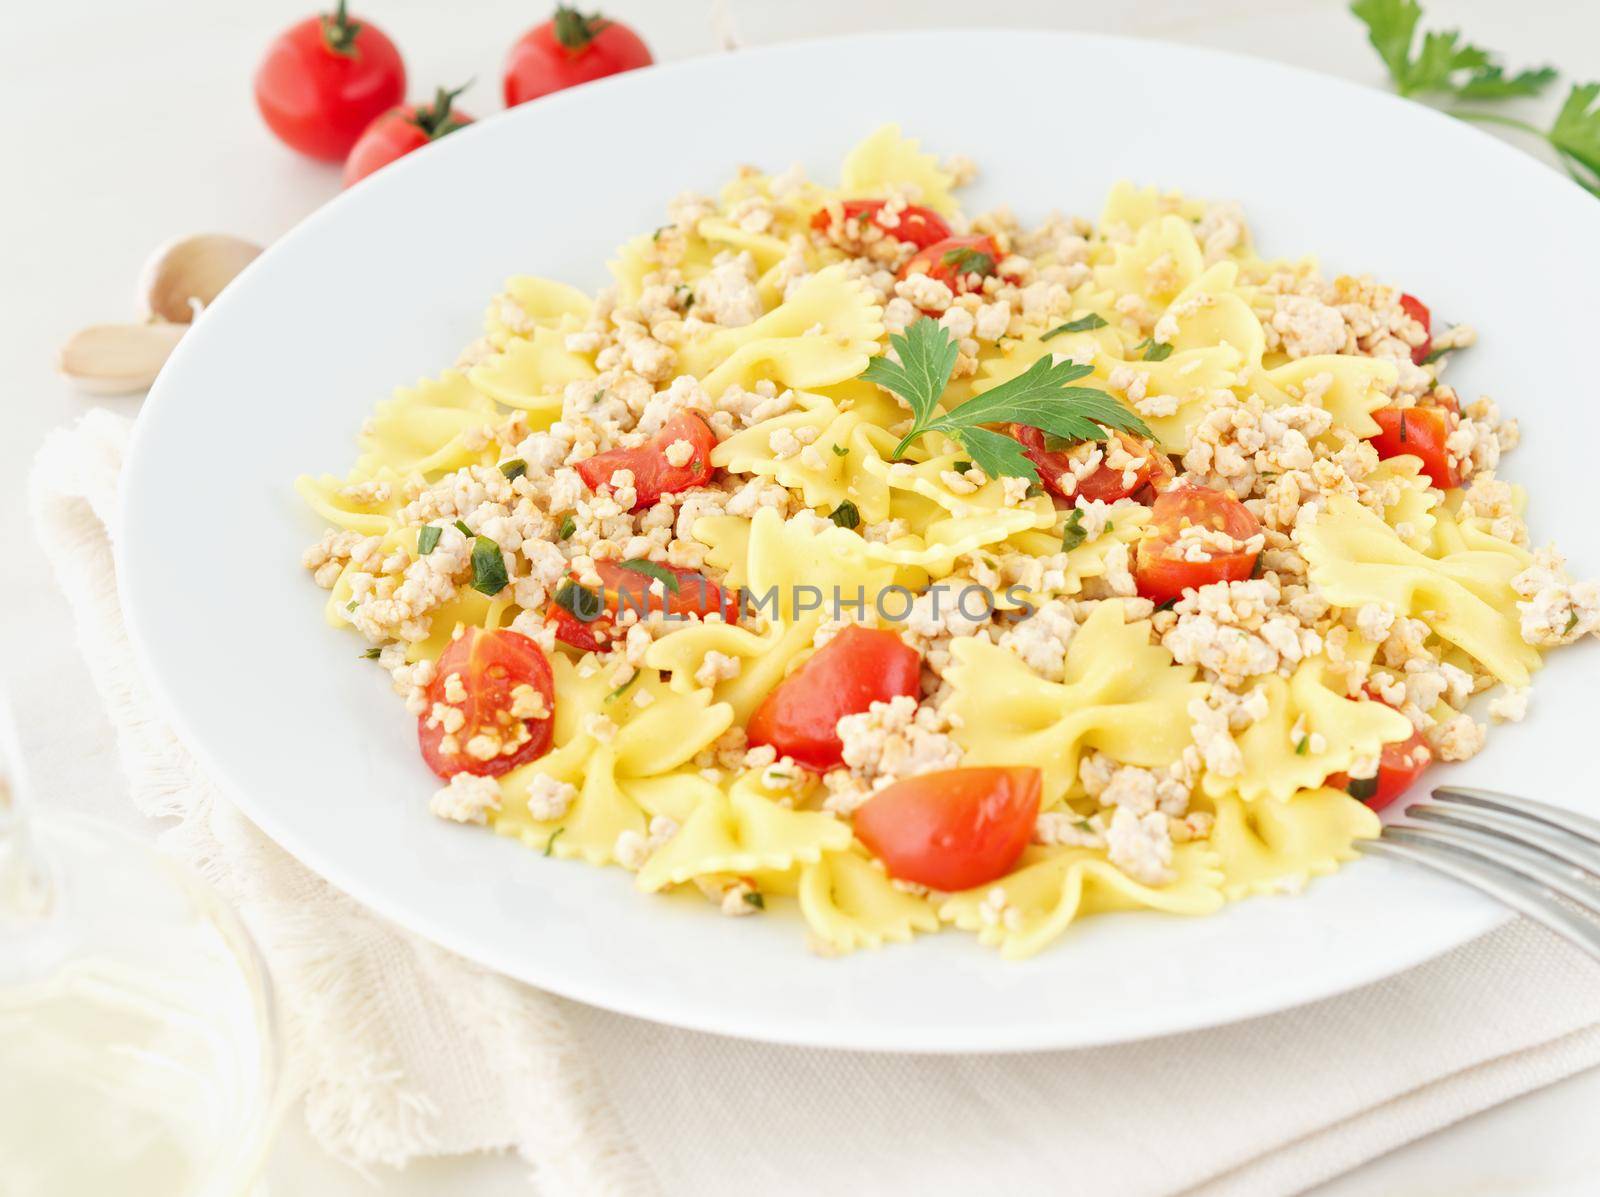 farfalle pasta with tomatoes, chiken meat, parsley on white stone background, low-calorie diet, side view by NataBene